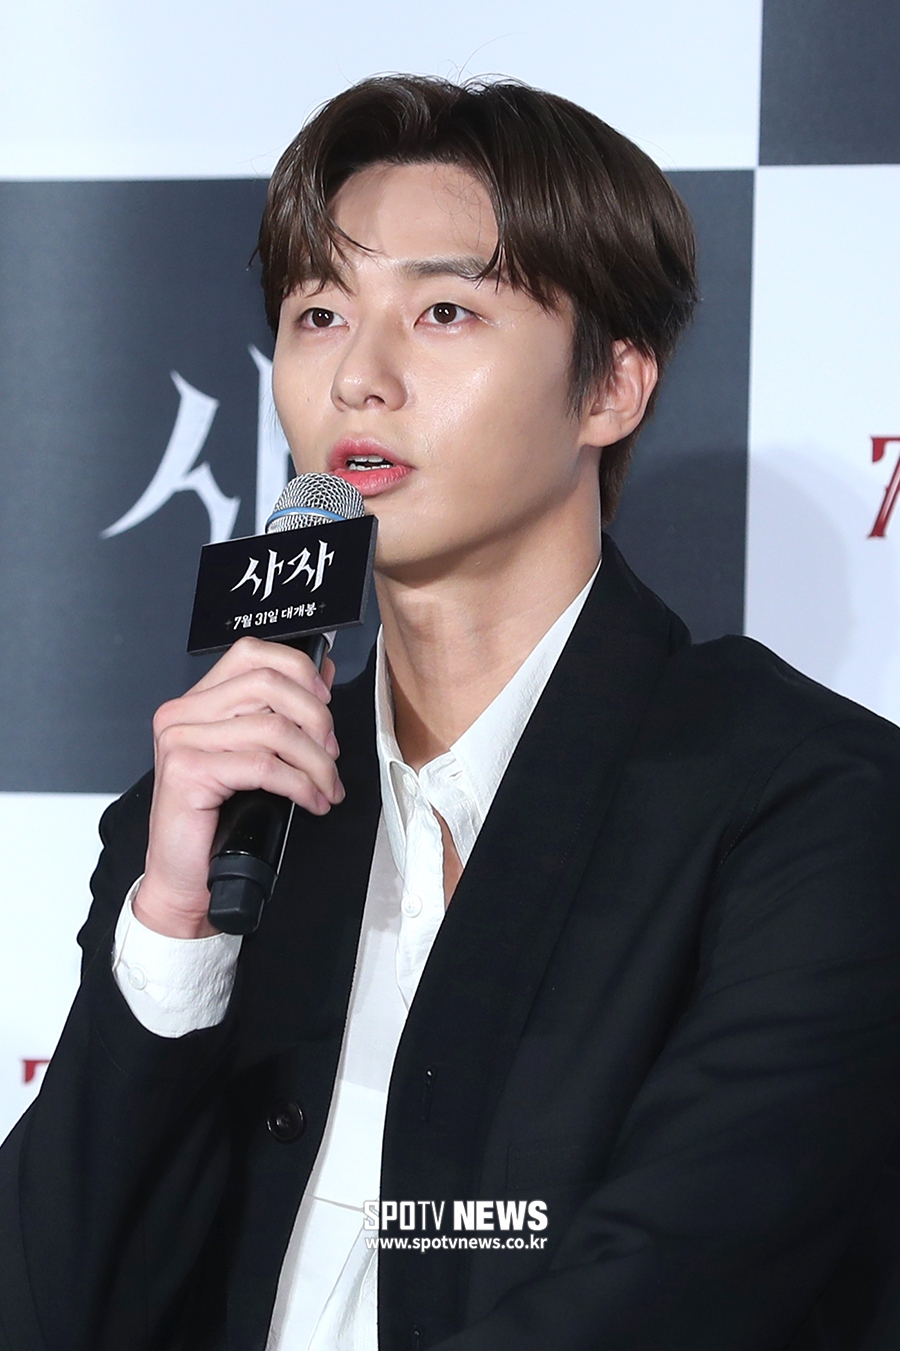 The movie Lion production meeting was held at the entrance of Lotte Cinema Counter in Jayang-dong, Gwangjin-gu, Seoul on the morning of the 26th. Actor Park Seo-joon is greeting.